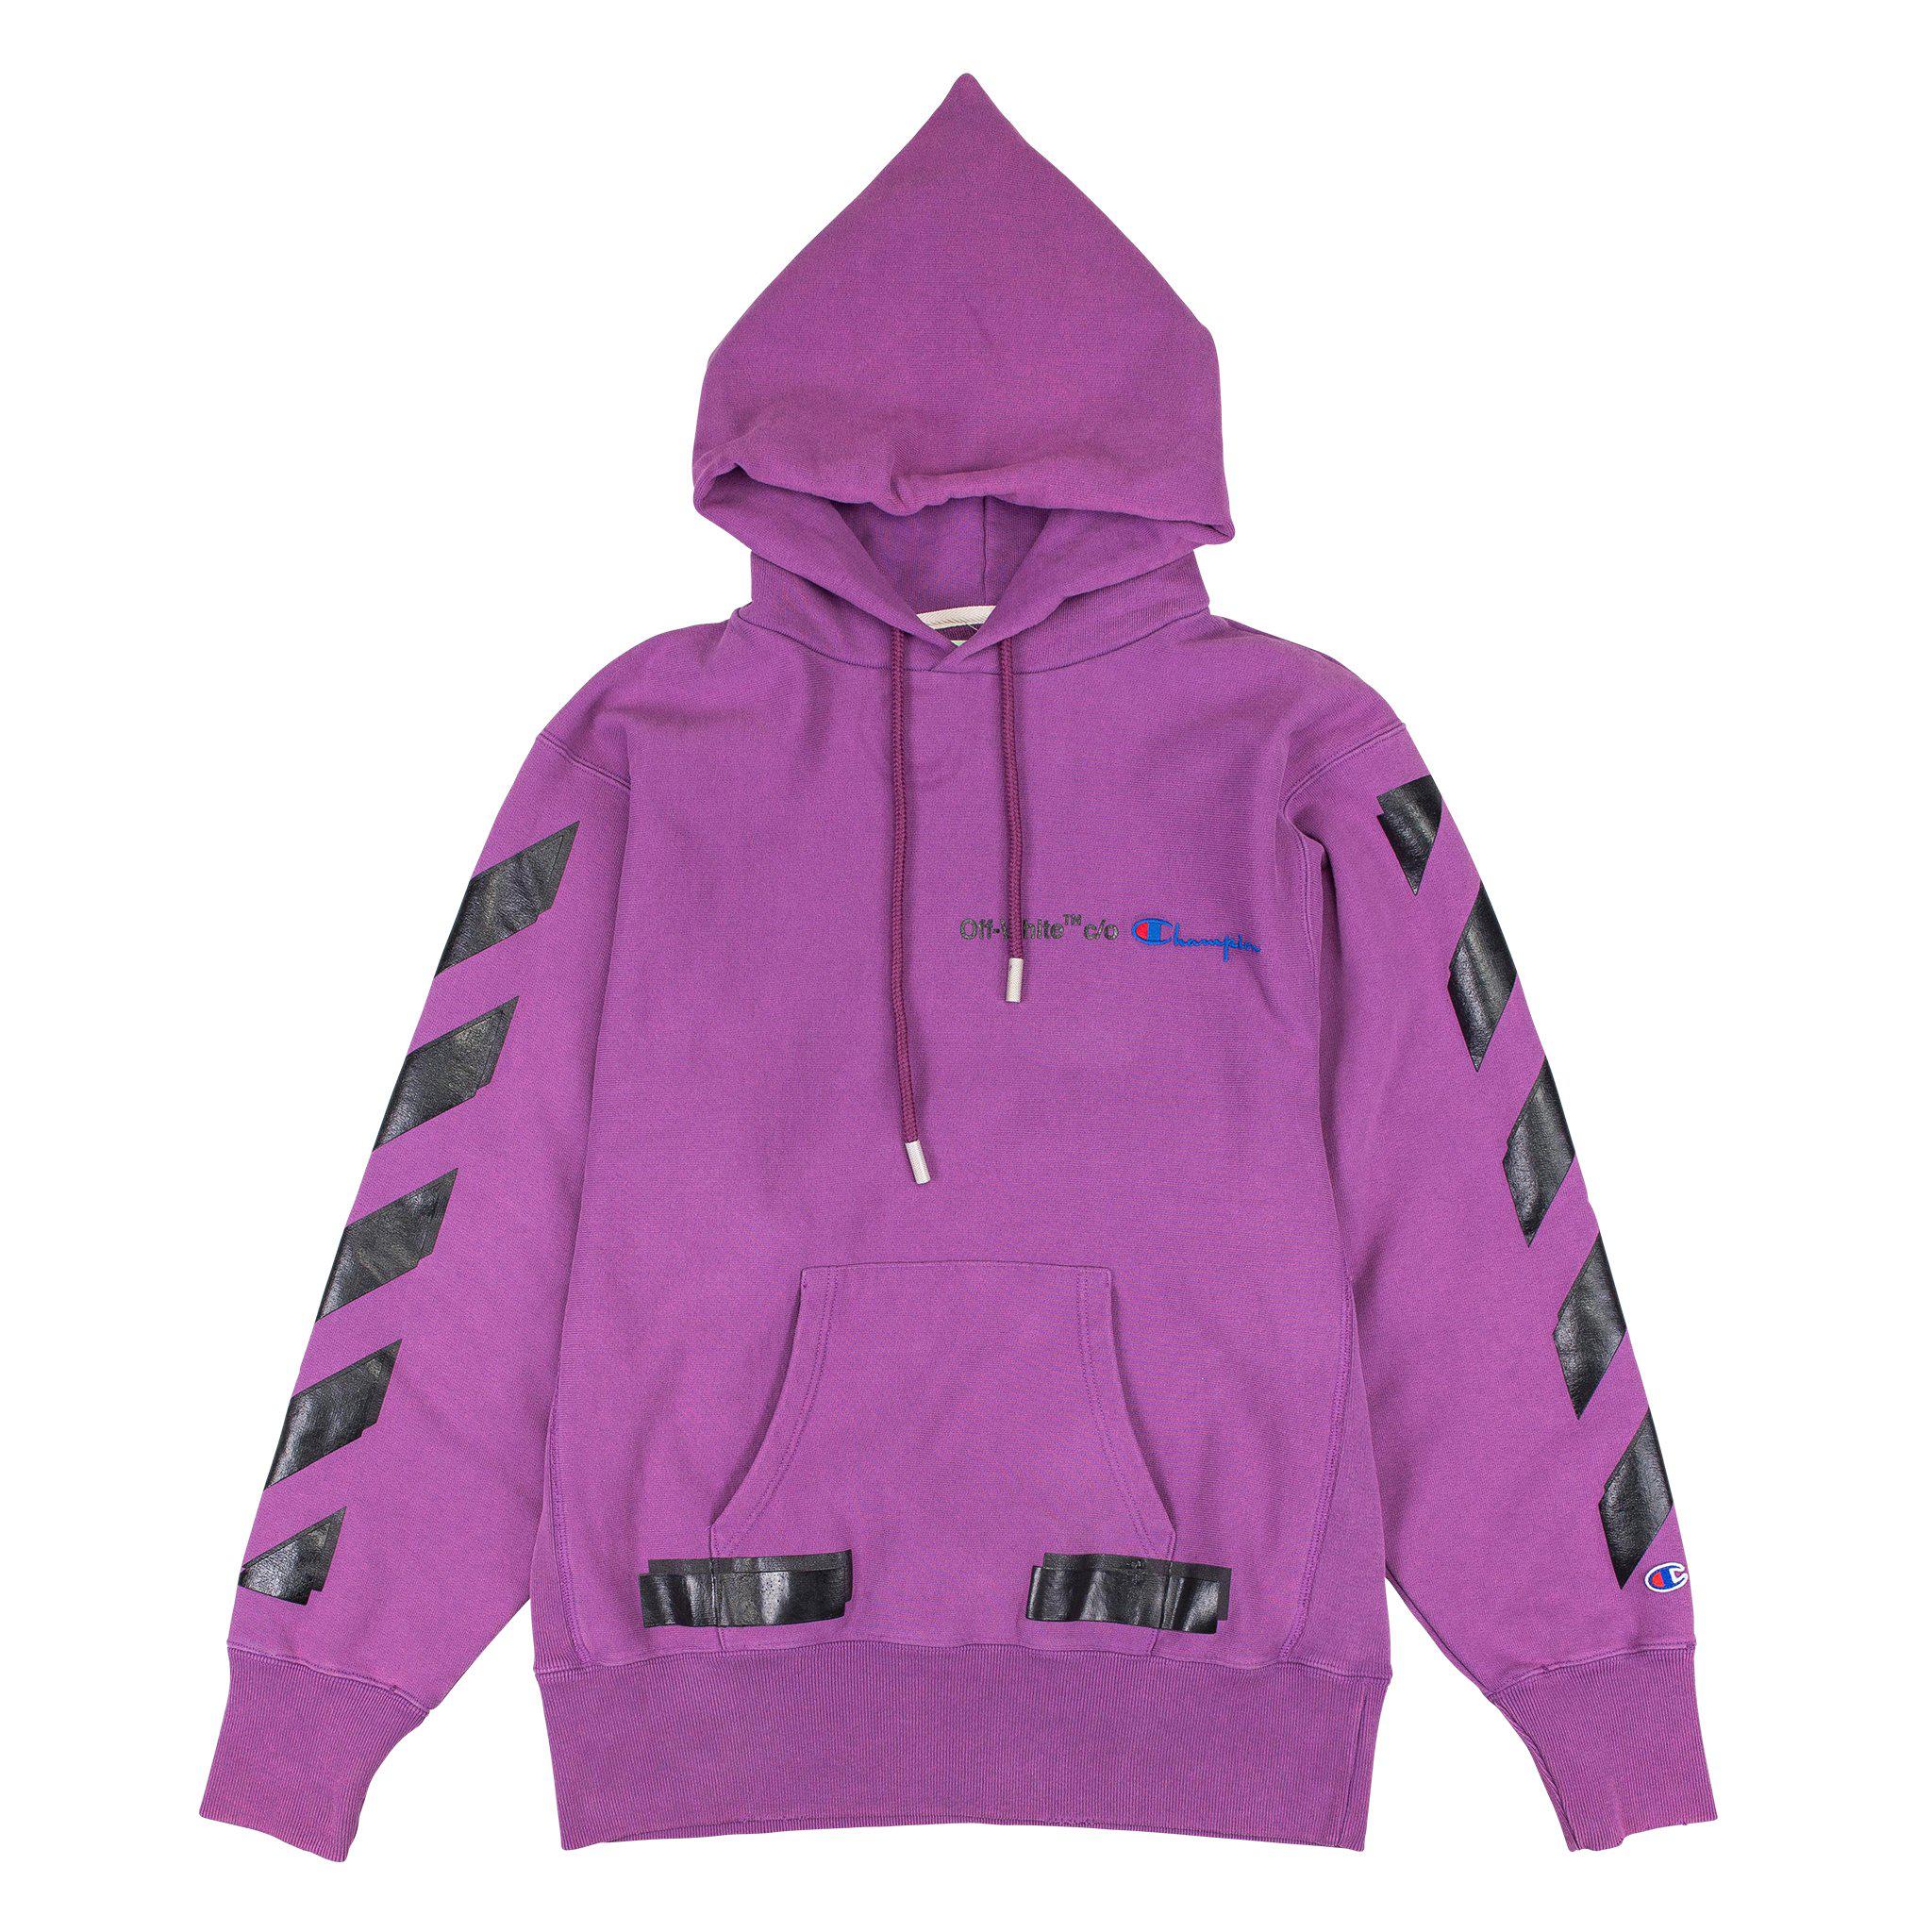 Lyst - Off-White C/O Virgil Abloh Champion Hoodie in Purple for Men